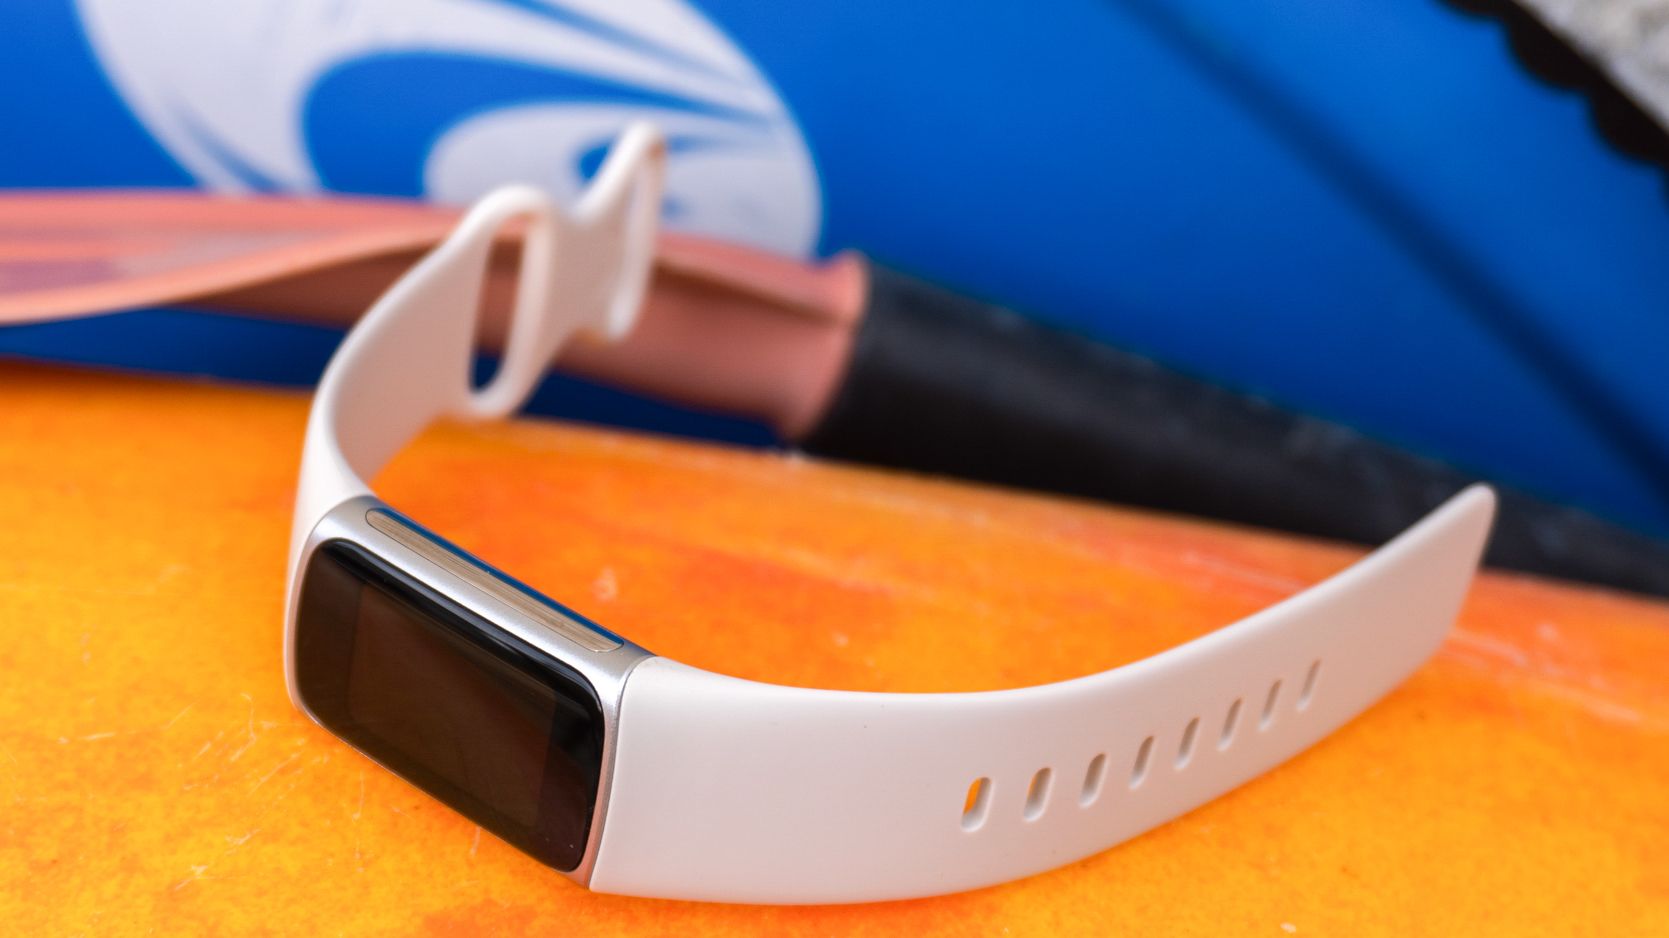 The new Charge 6 is proof that Google can improve Fitbit, not just ruin it